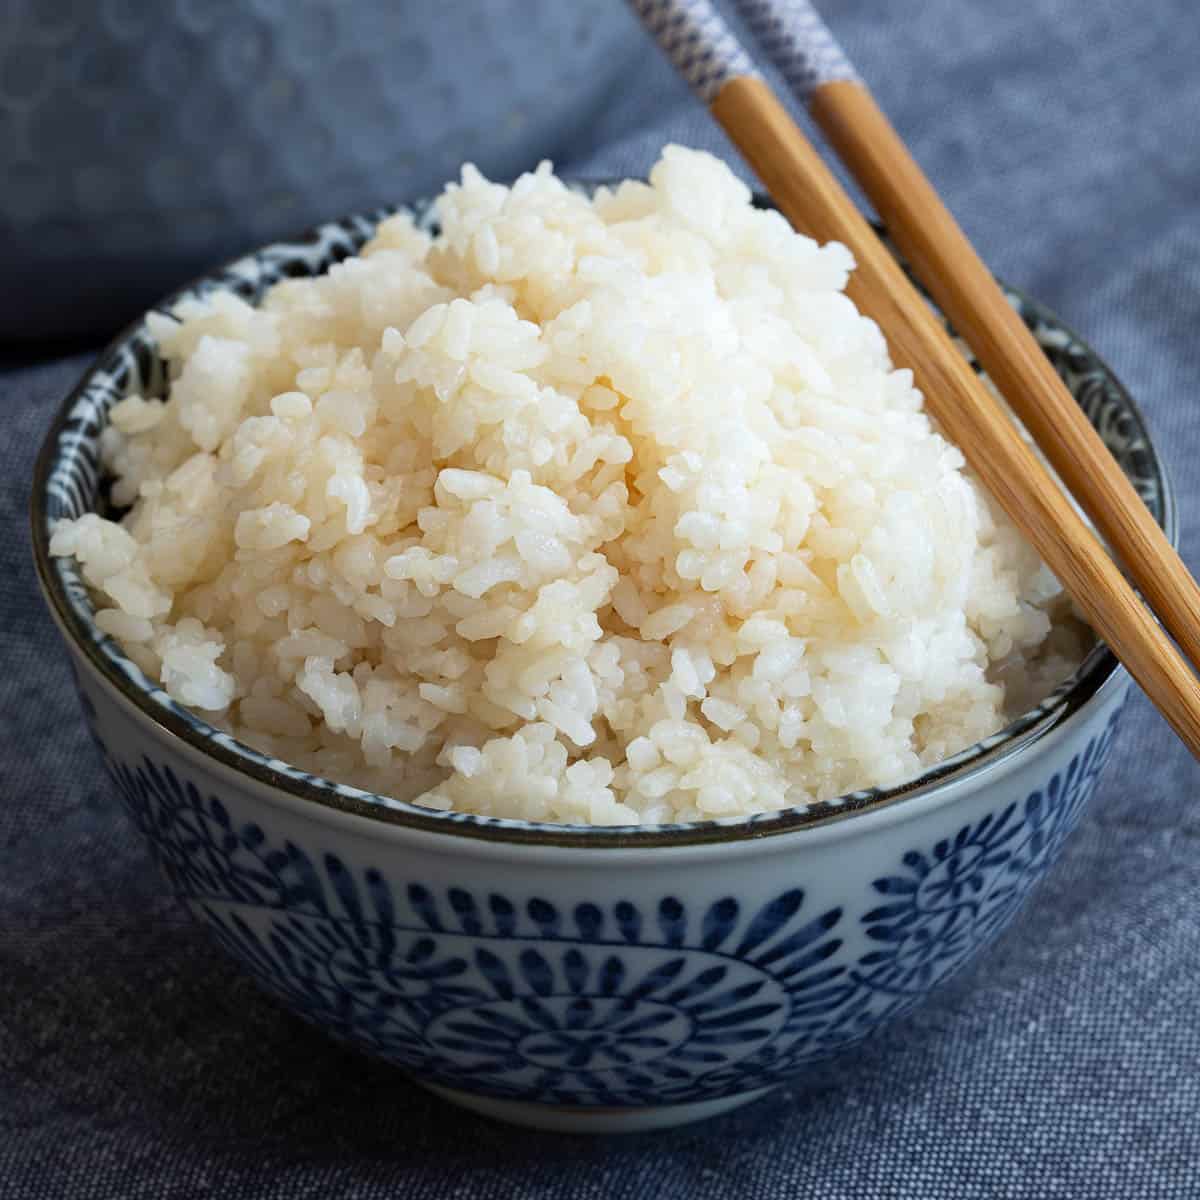 How to Cook Sushi Rice - Rice Cooker, Instant Pot & Stovetop